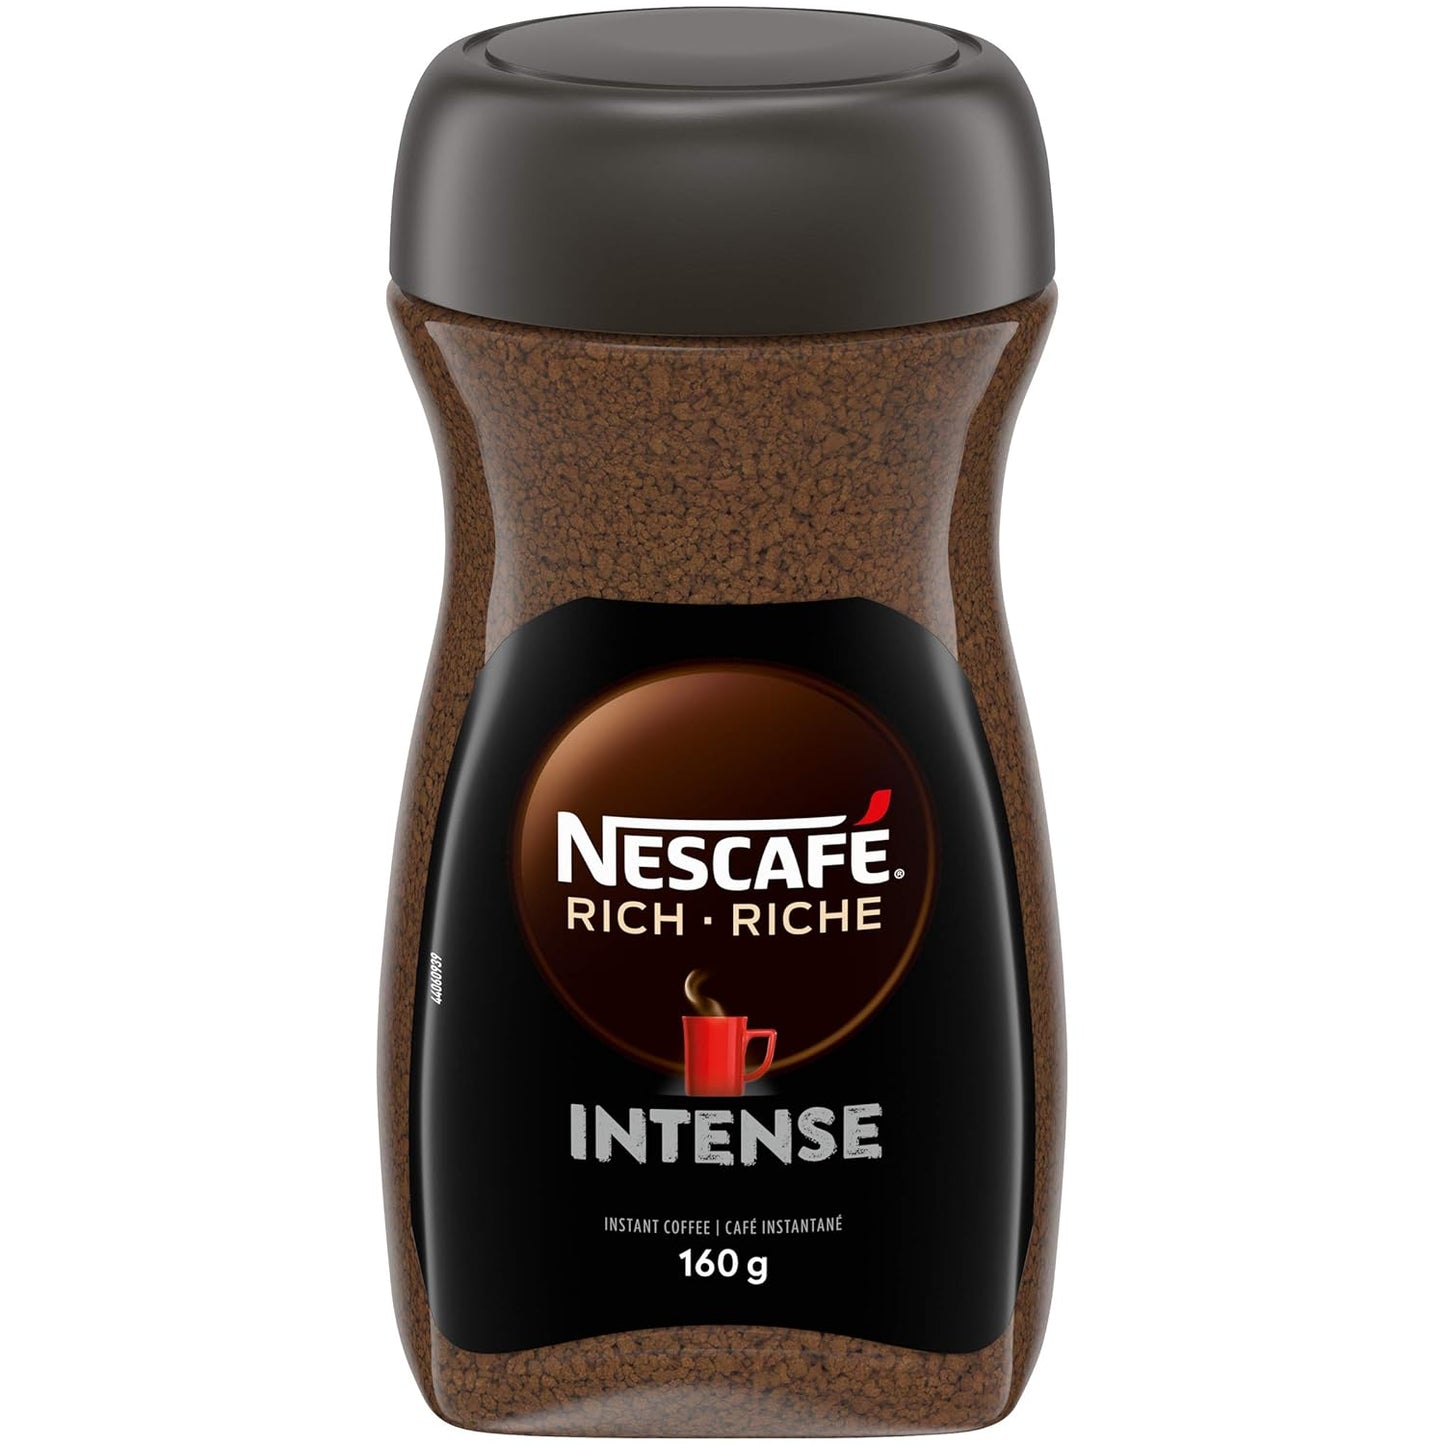 Nescafe Rich Intense Instant Coffee 160g/5.6oz (Shipped from Canada